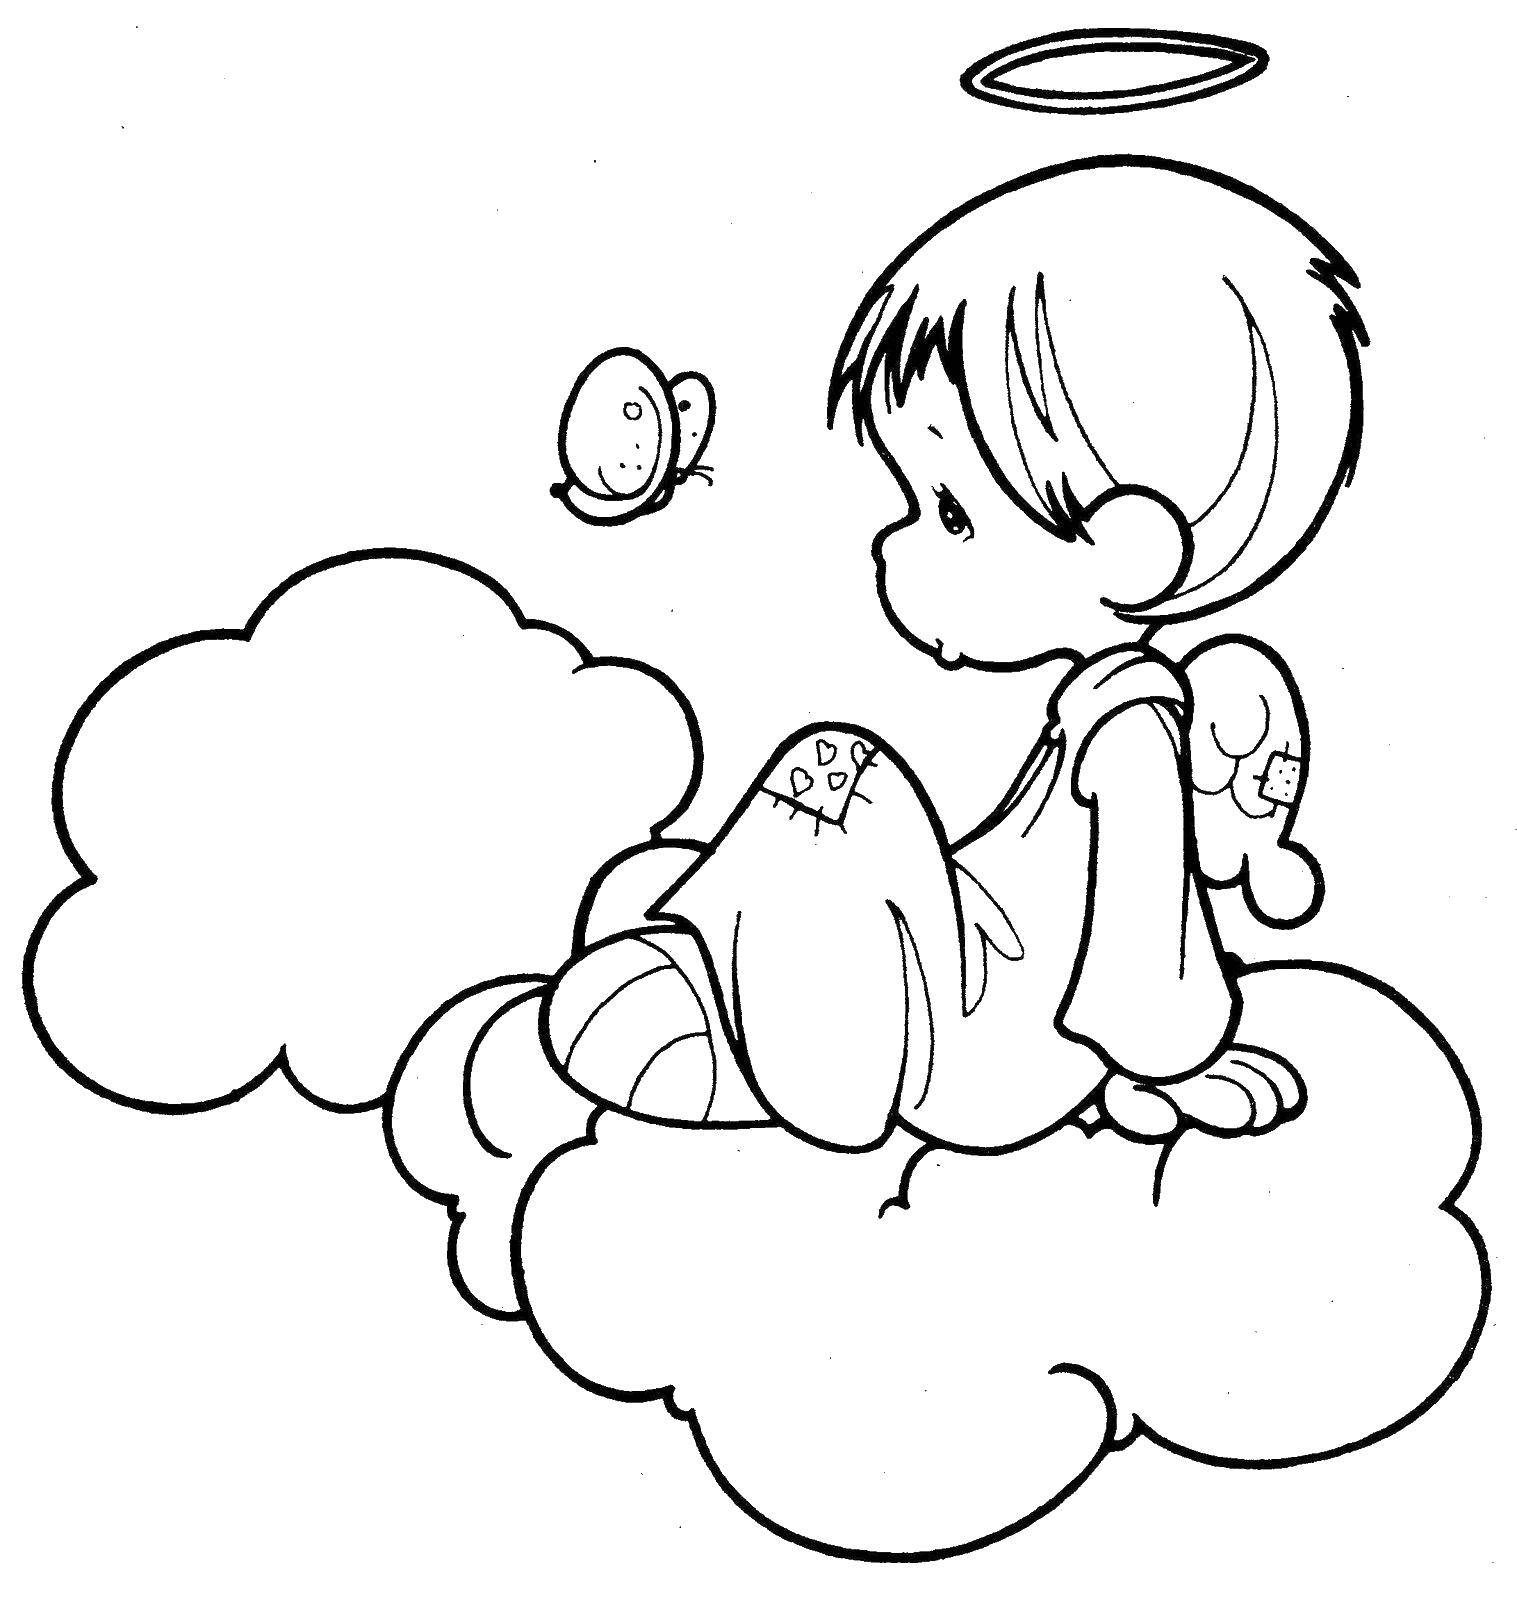 Coloring Angel. Category People. Tags:  angel.